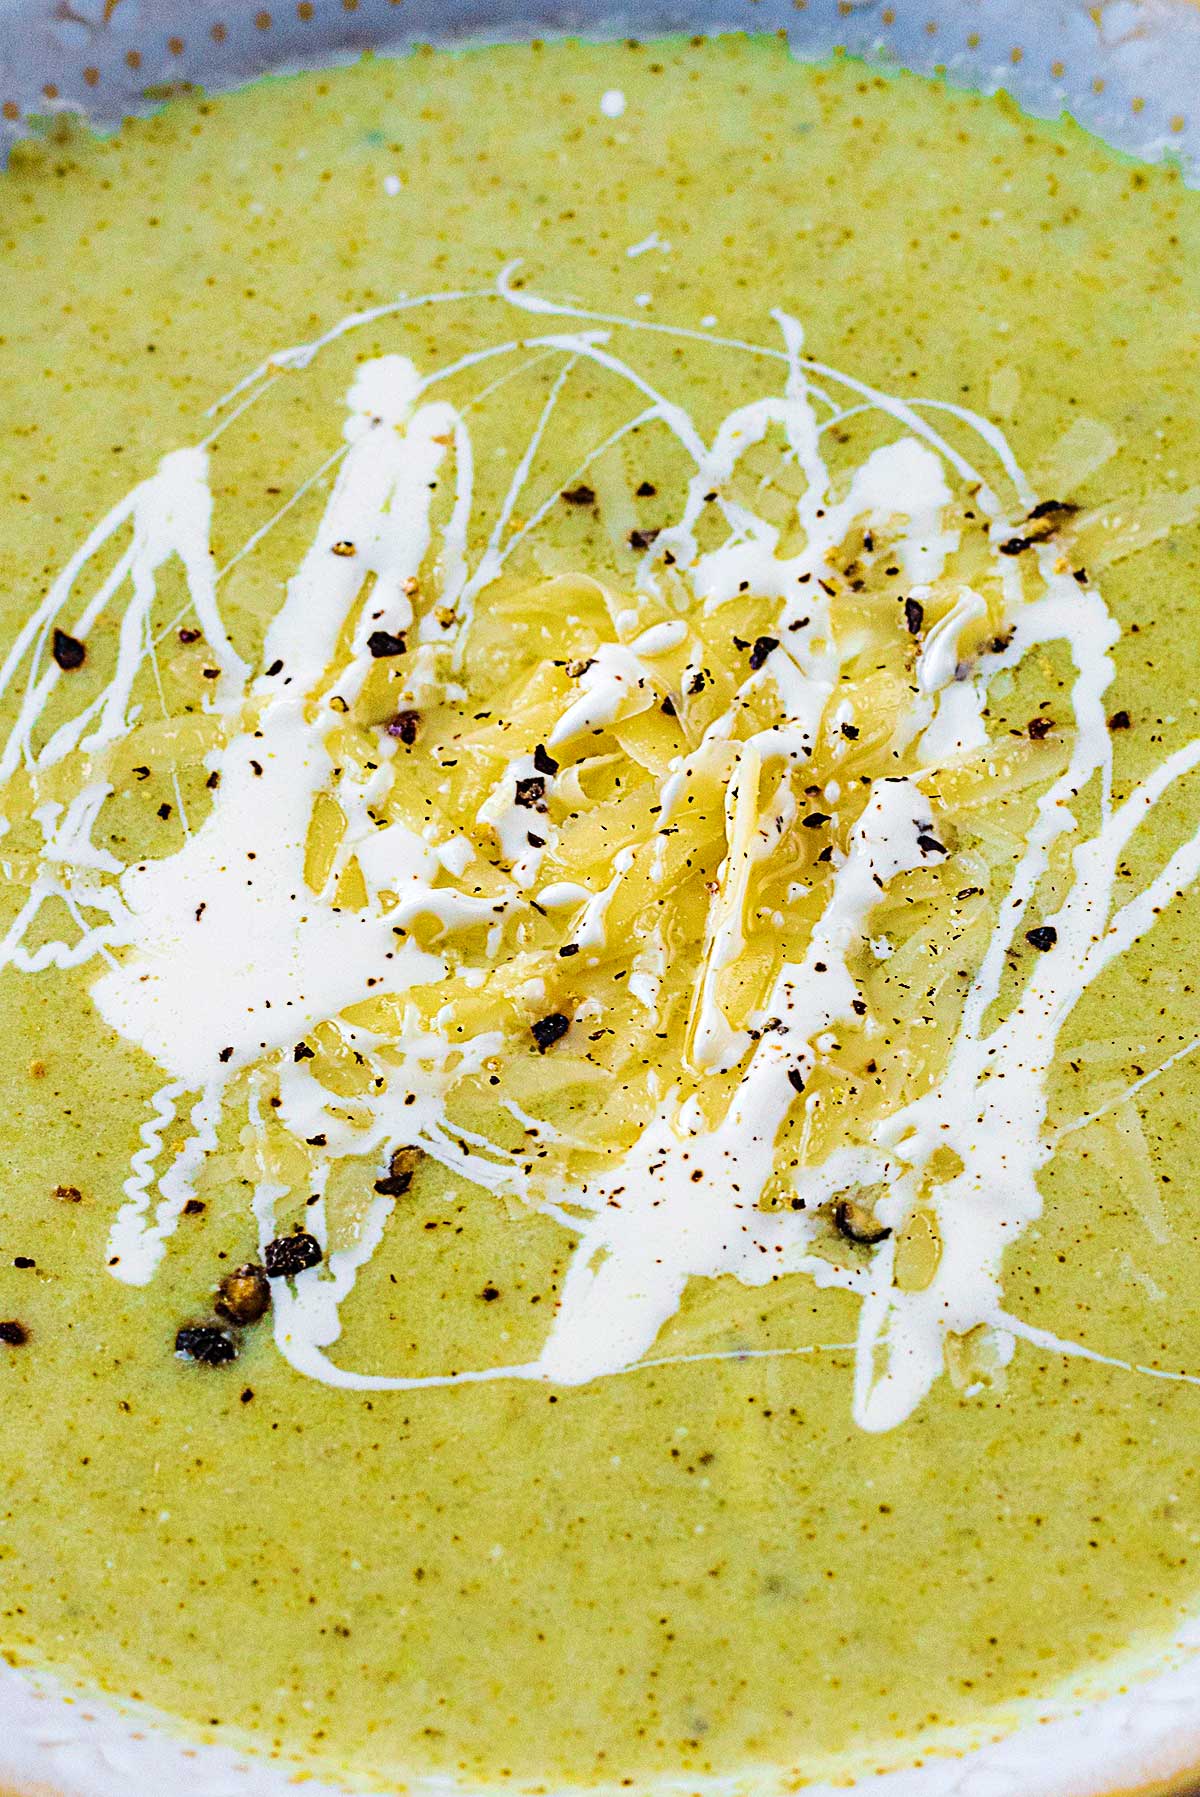 Grated cheese and cream on the surface of some soup.